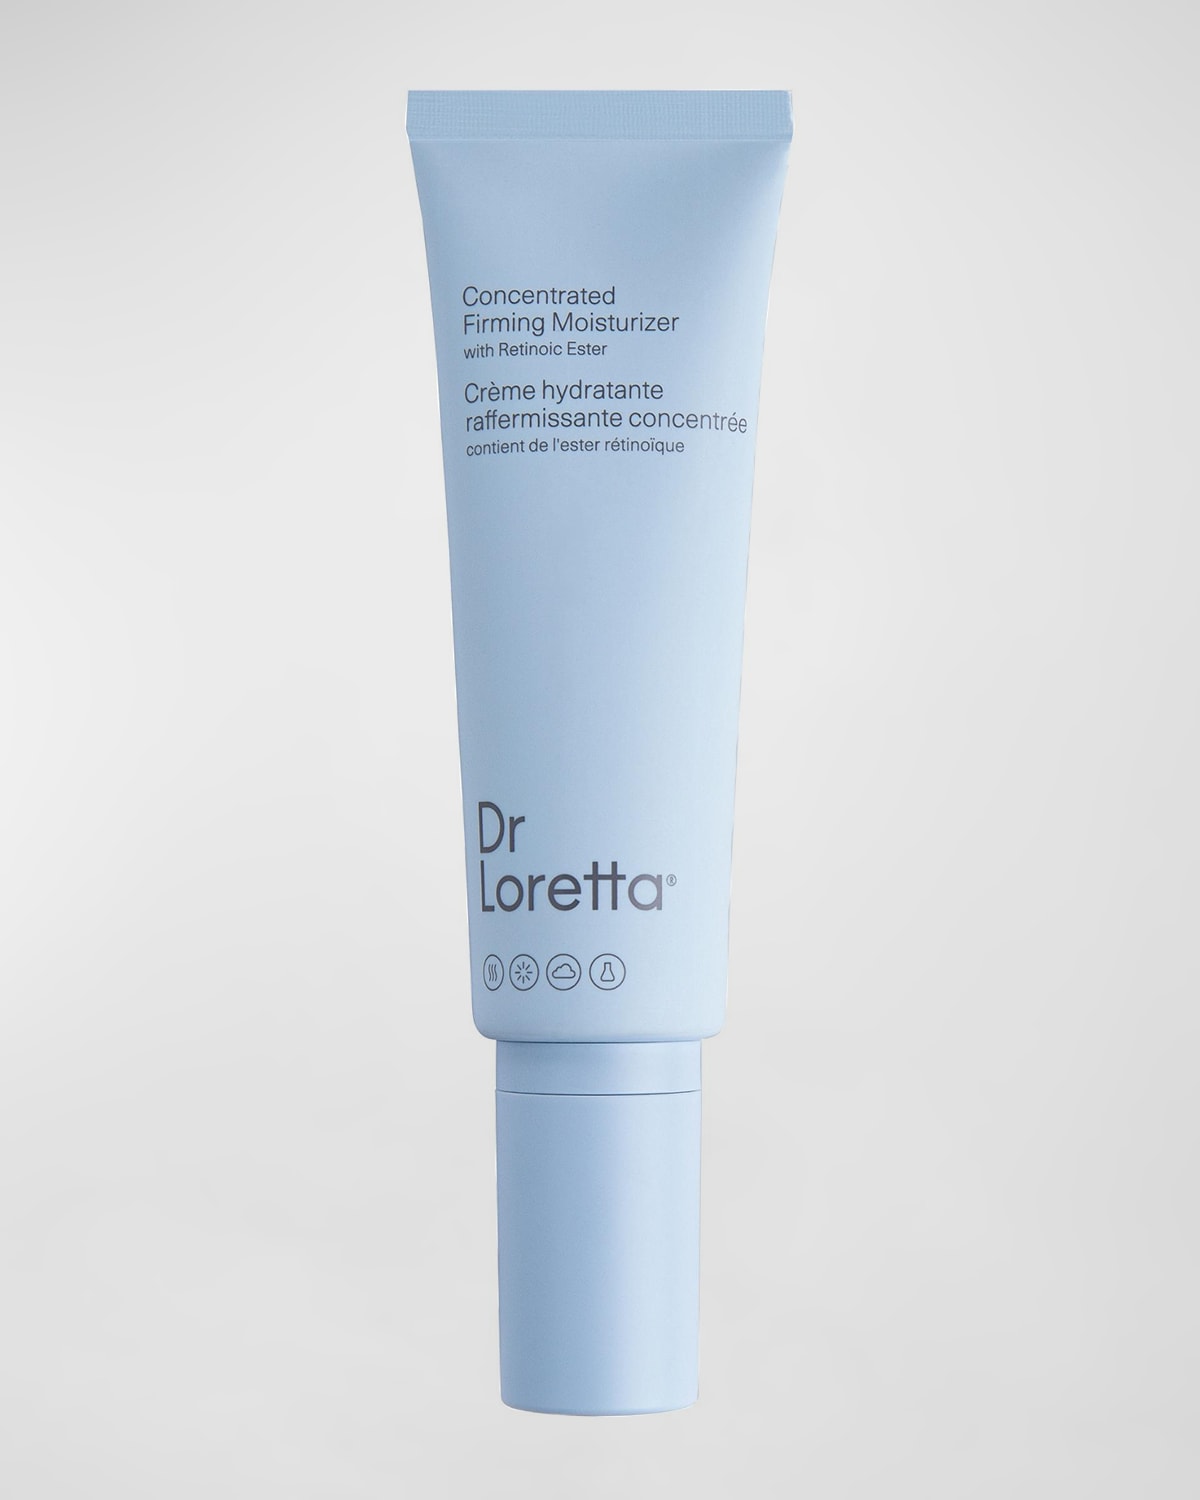 Dr Loretta Concentrated Firming Moisturizer